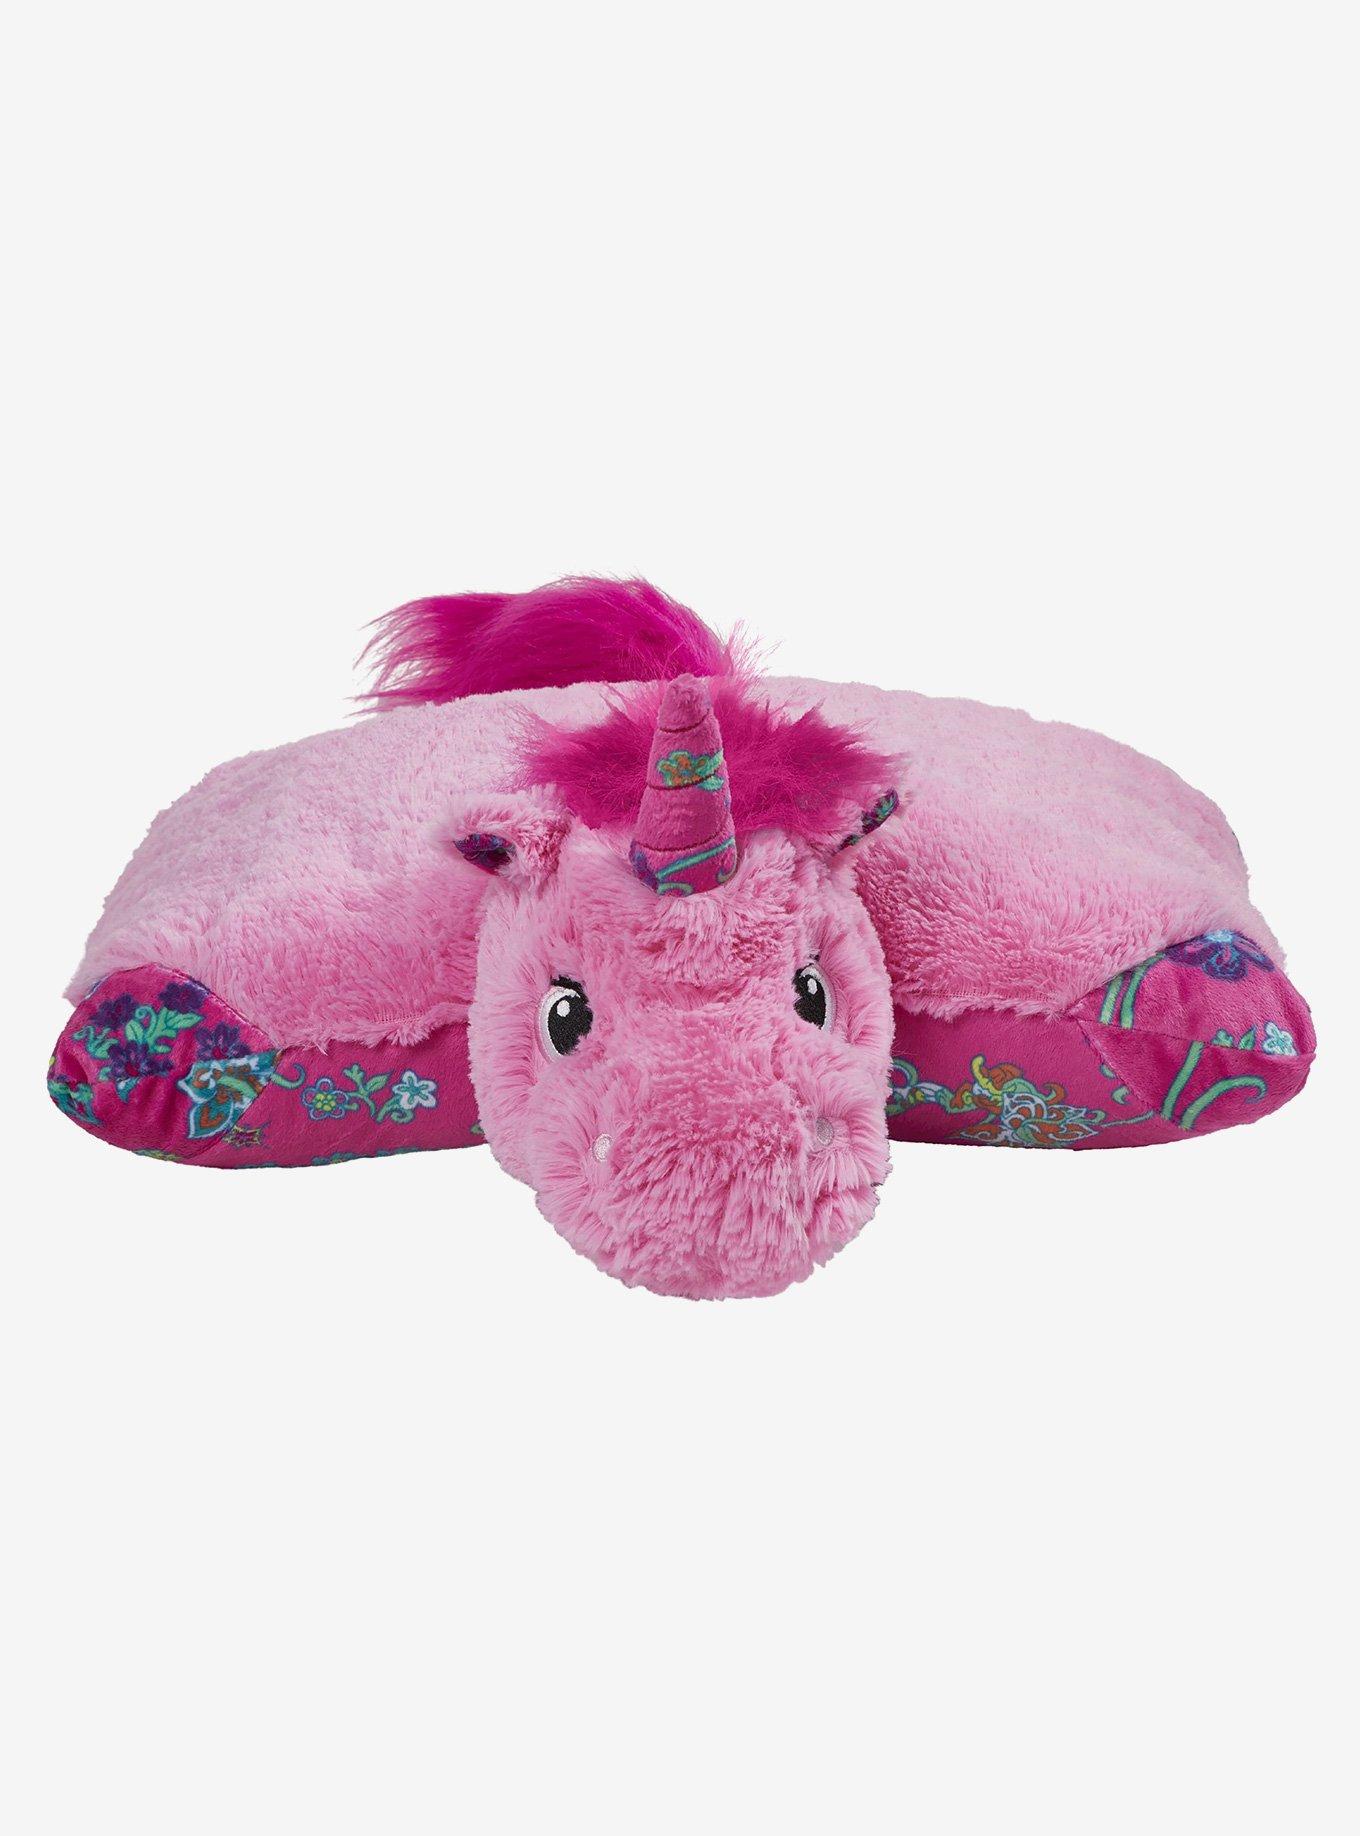 Hot Topic Colorful Pink Unicorn Pillow Pets Plush Toy | Shop Midtown